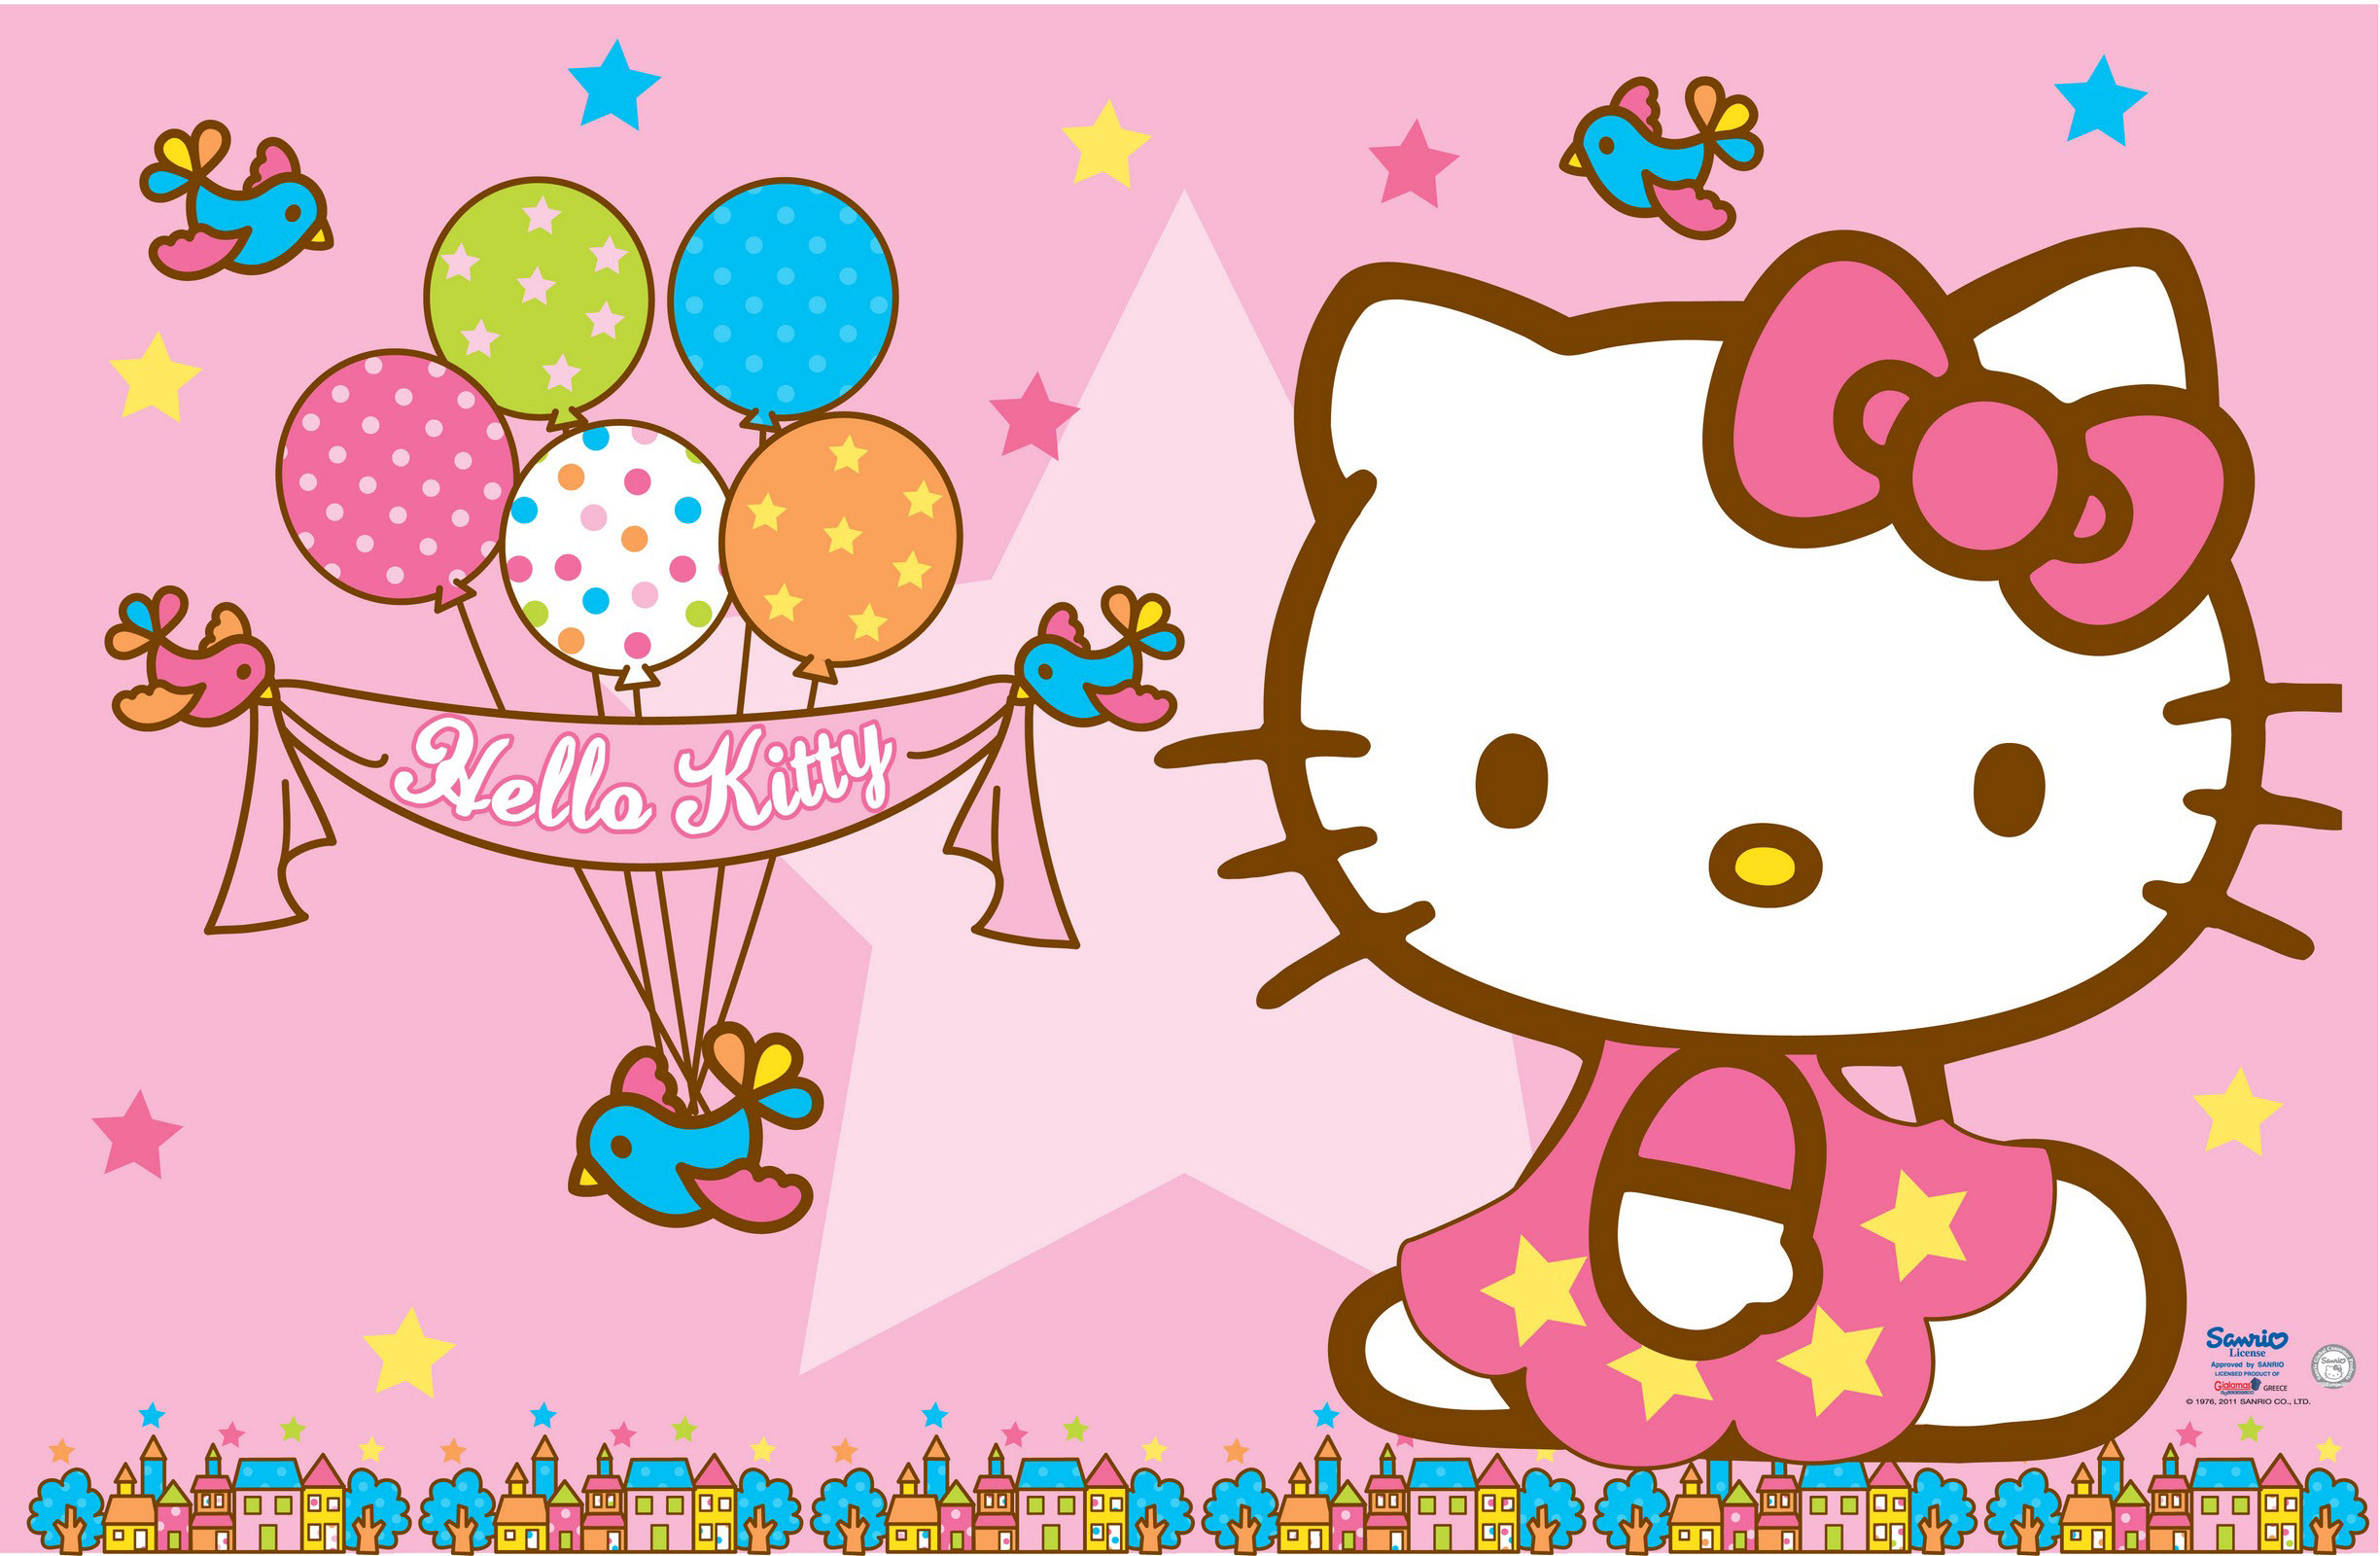 Picture Of Hello Kitty Wallpaper Pink Background And Balloons For